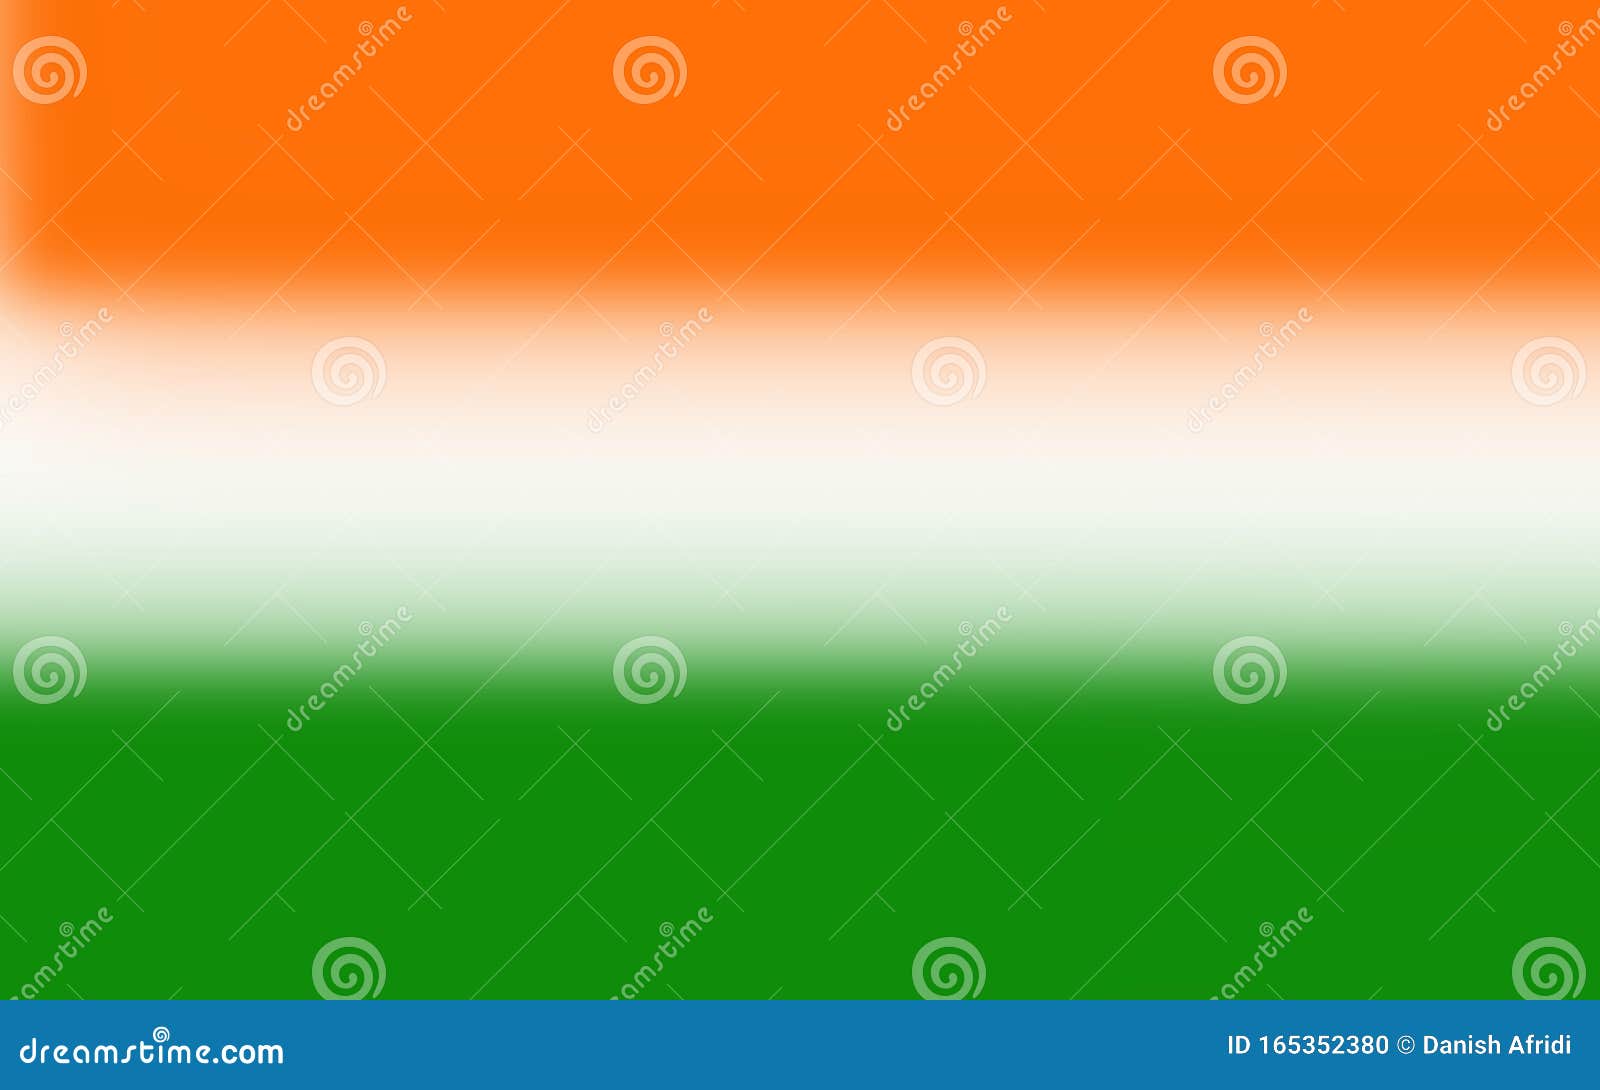 Country Flags with High Quality Photo of Indian Flag or Tiranga for  Wallpaper - Allpicts | Indian flag photos, Indian flag images, Indian flag  wallpaper